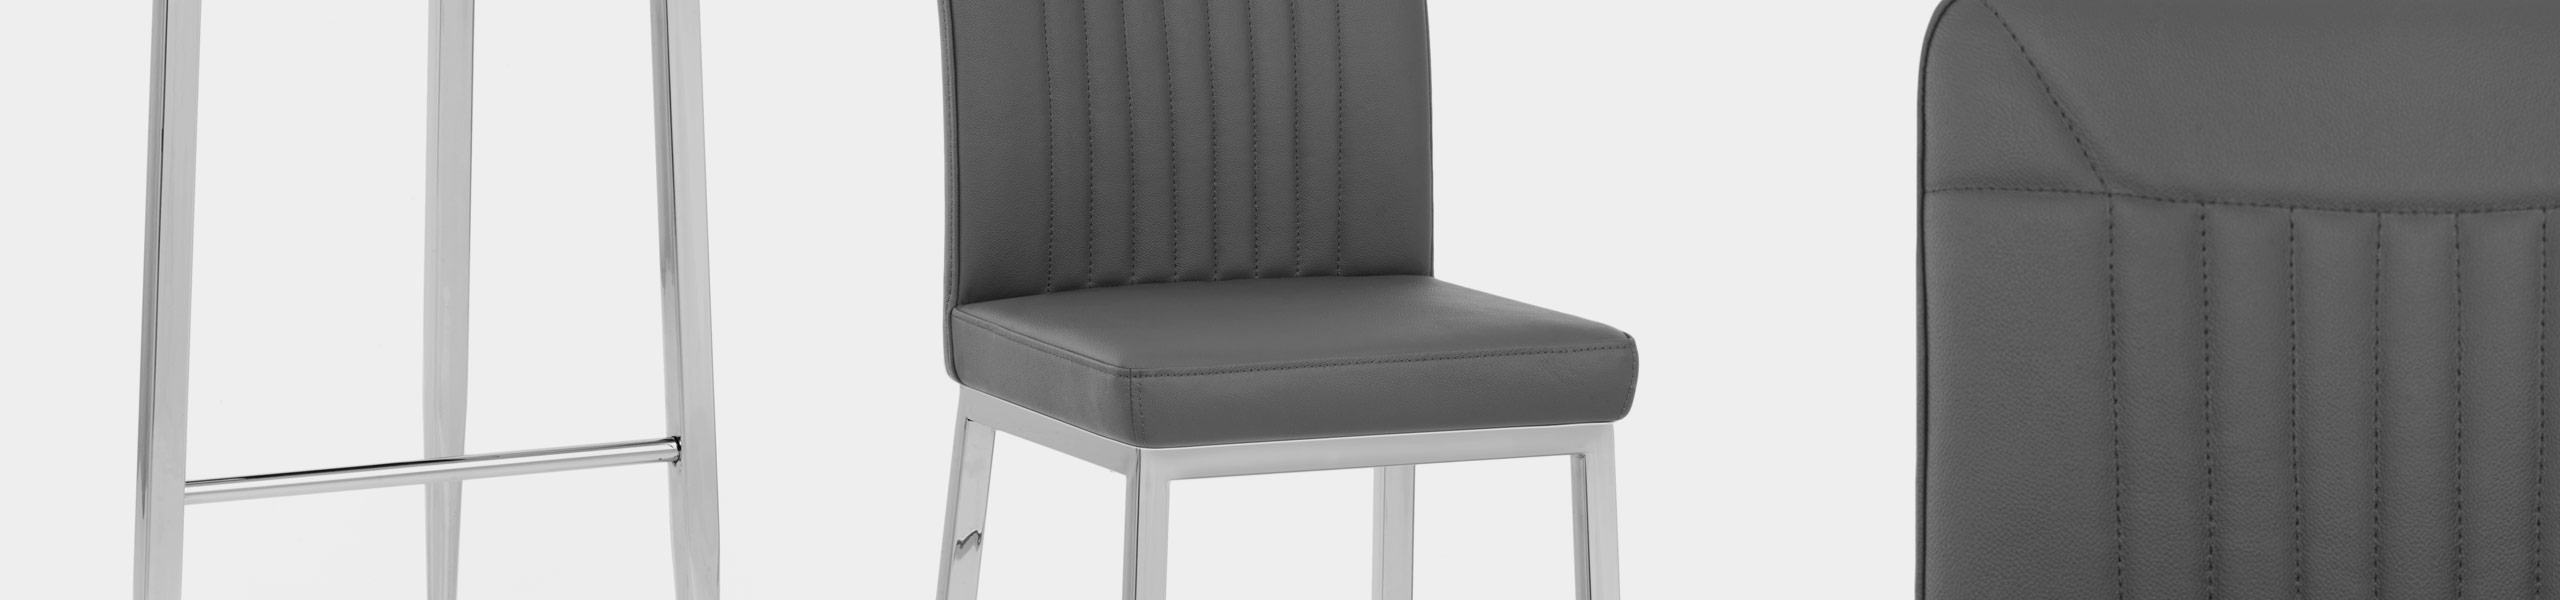 Jensen Stool Grey Real Leather Video Banner